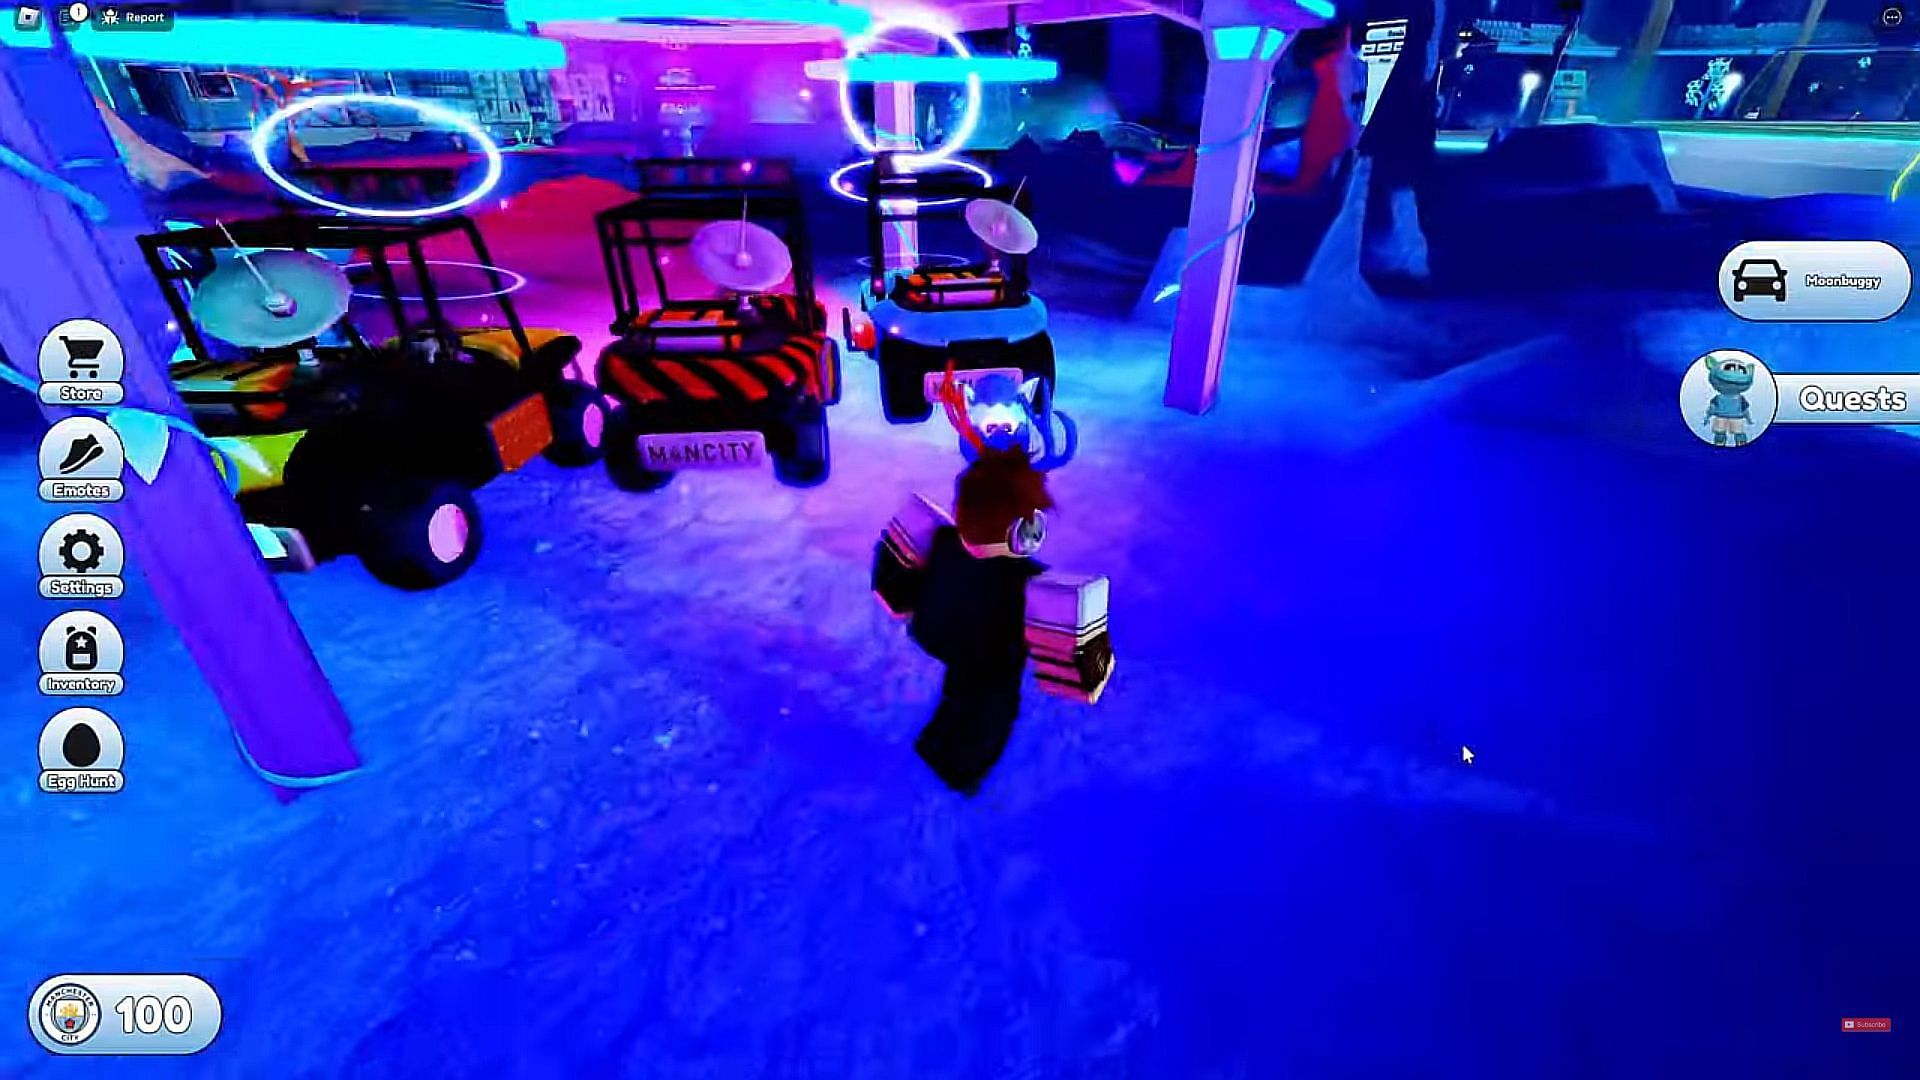 Easter Egg behind Buggy&#039;s vehicles (Image via Conor3D/YouTube)